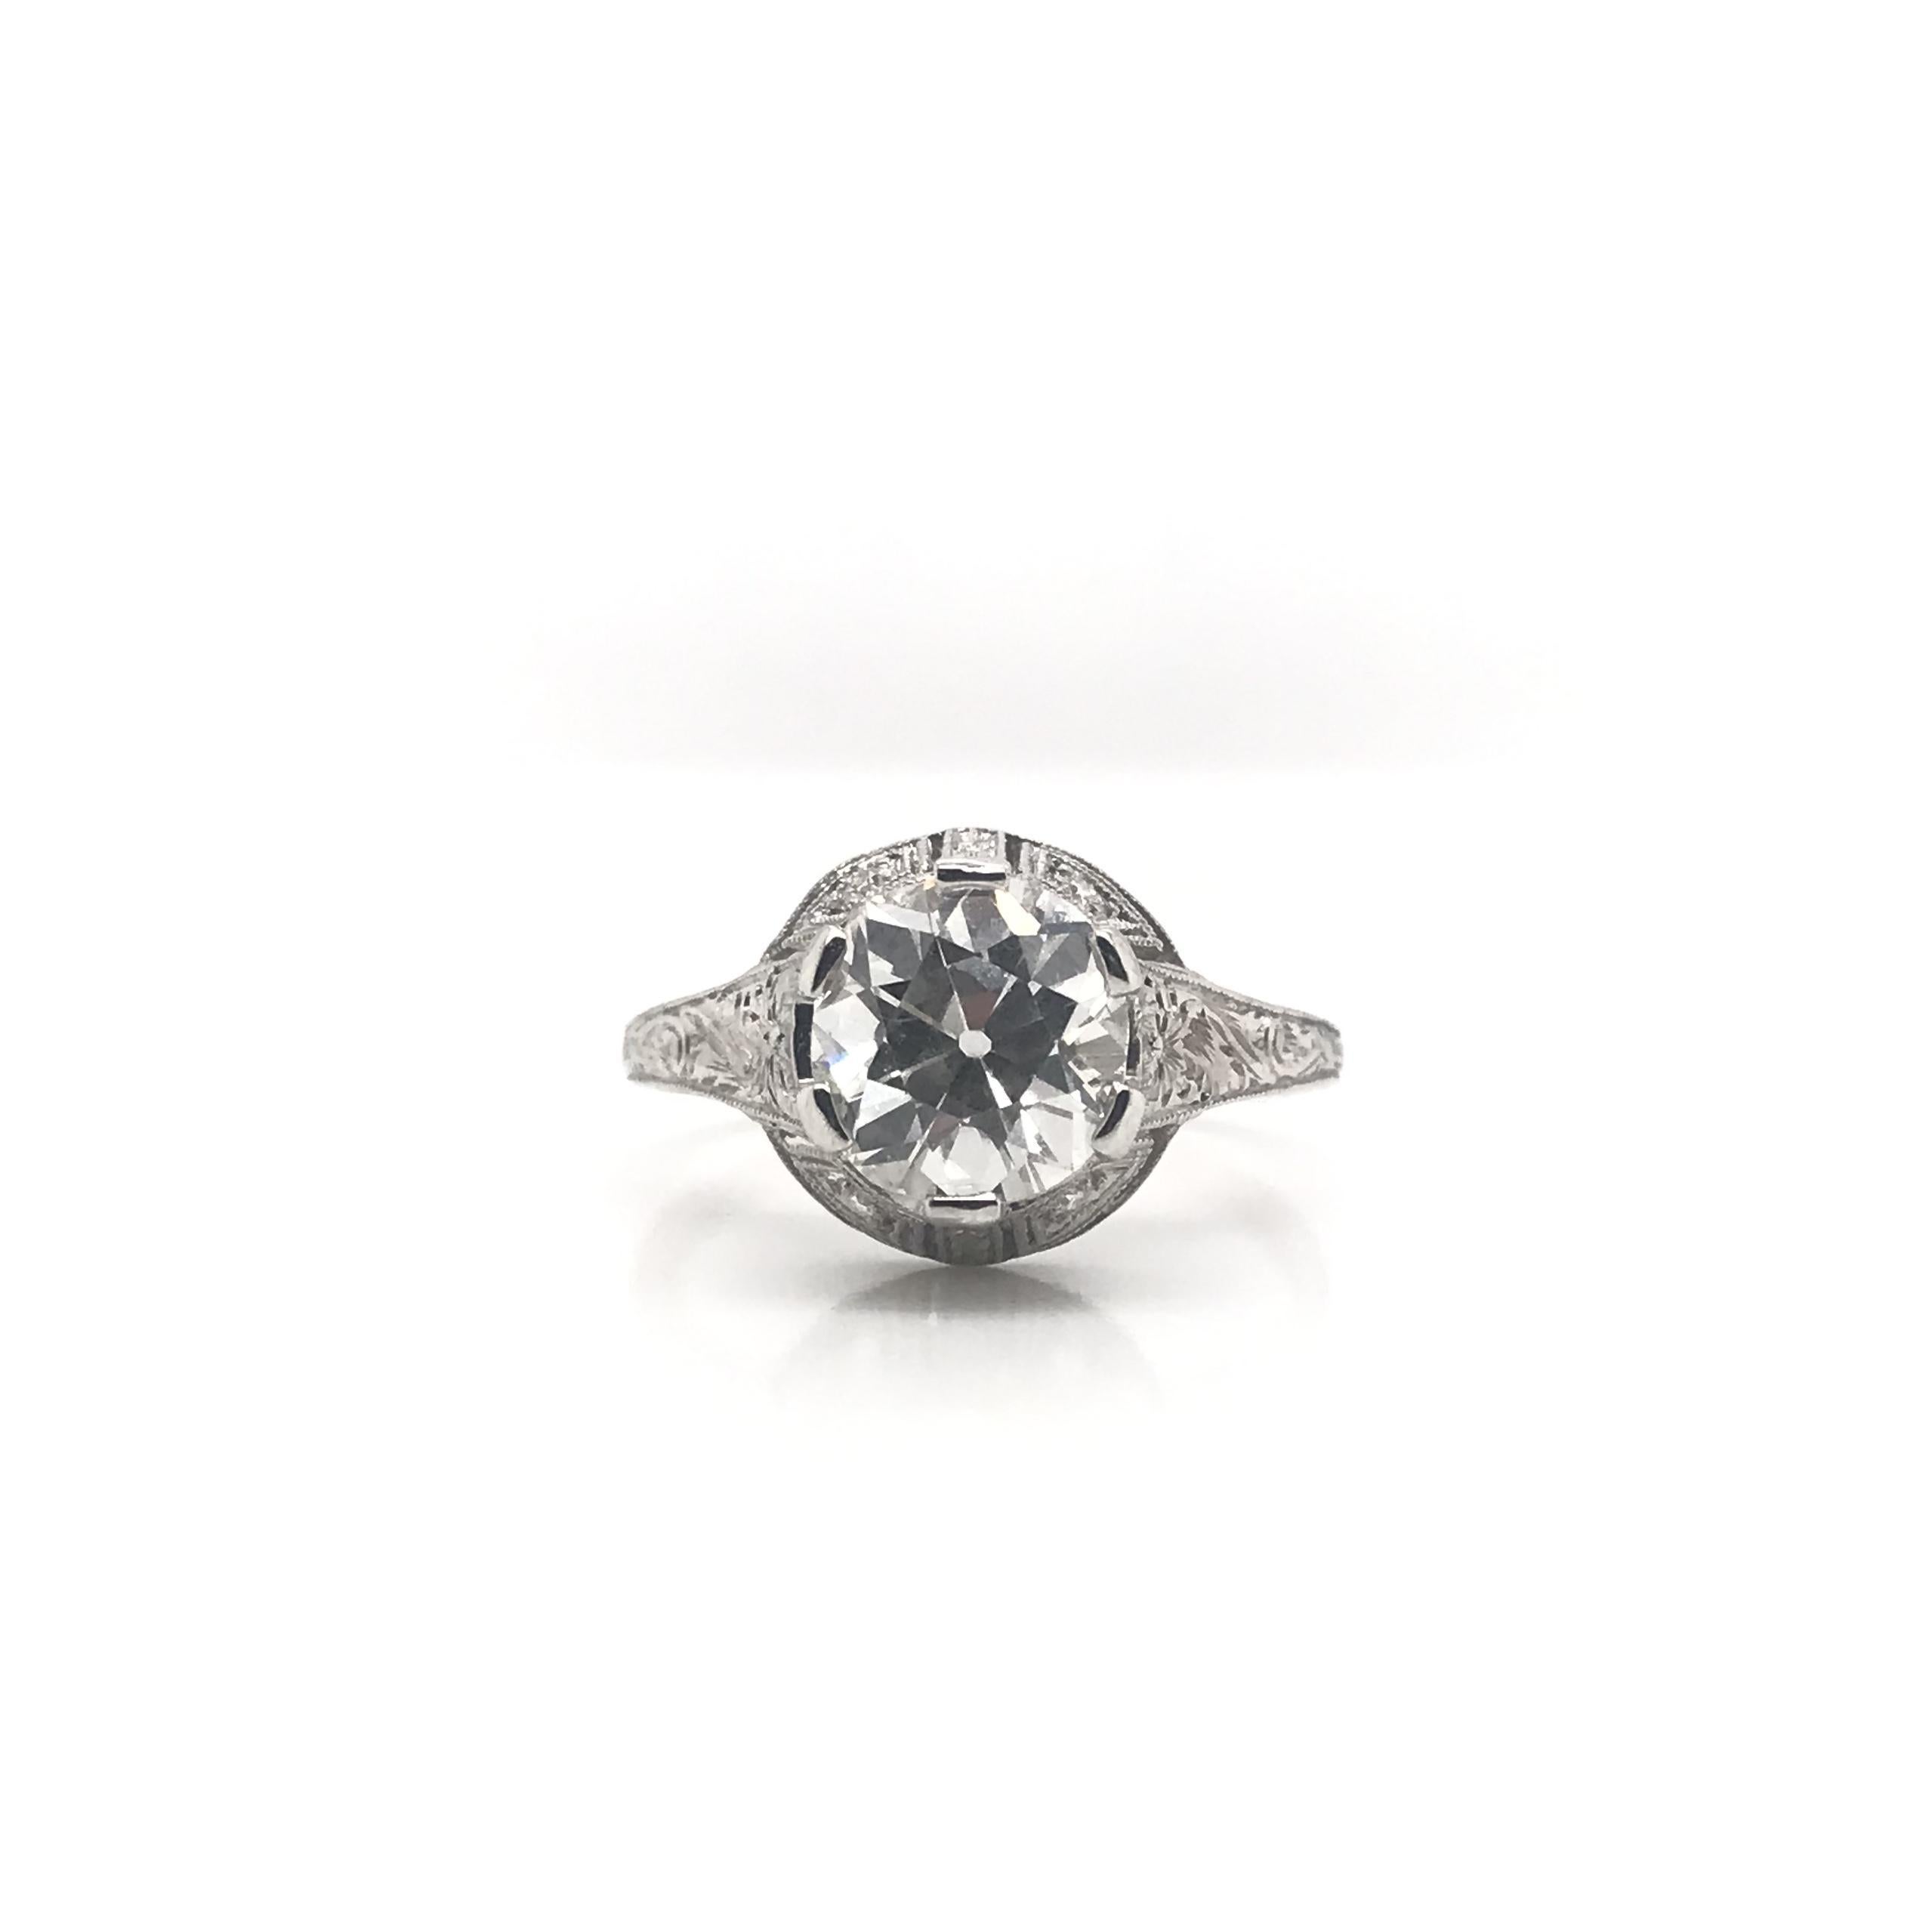 This antique piece was crafted sometime during the Edwardian design period (1900-1920). The platinum filigree setting features an antique center diamond measuring approximately 2.07 carats. The center diamond has been certified by the Gemological